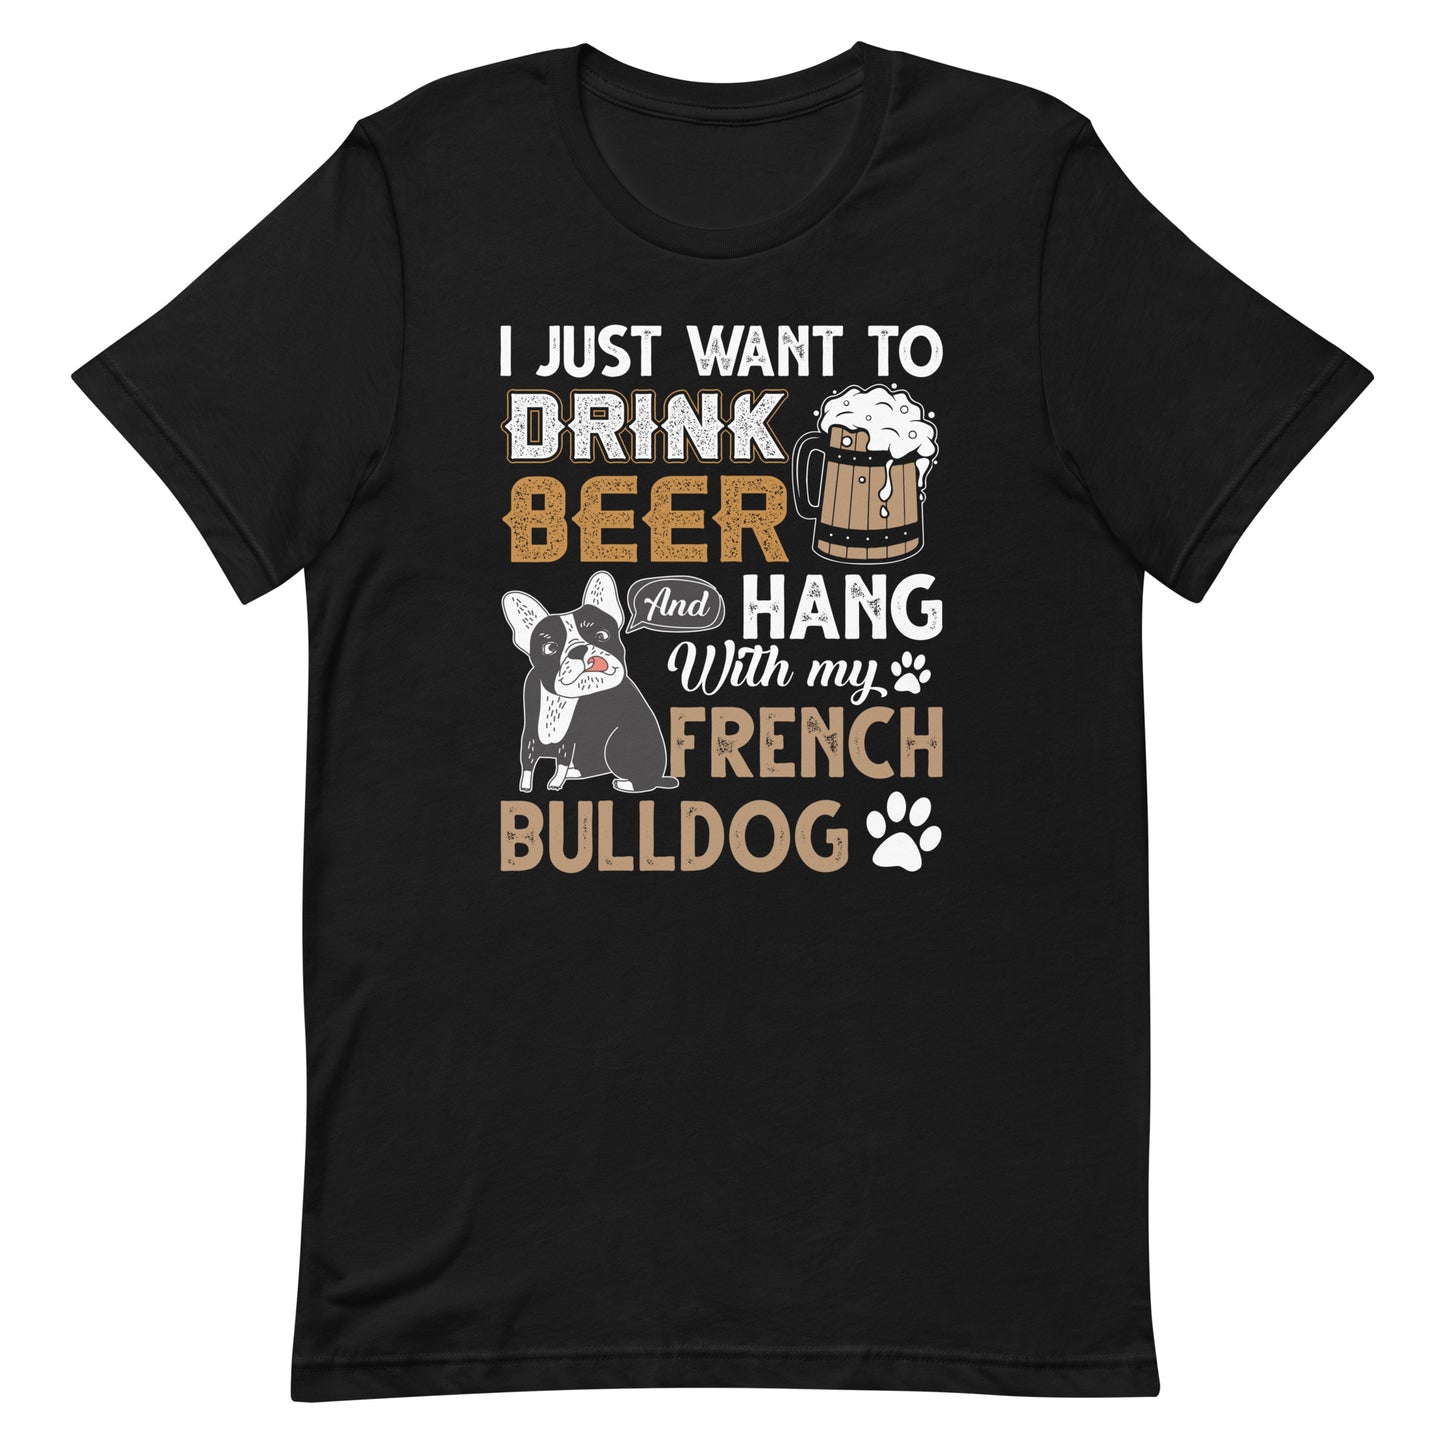 I Just Want to Drink Beer and Hang with my French Bulldog T-Shirt